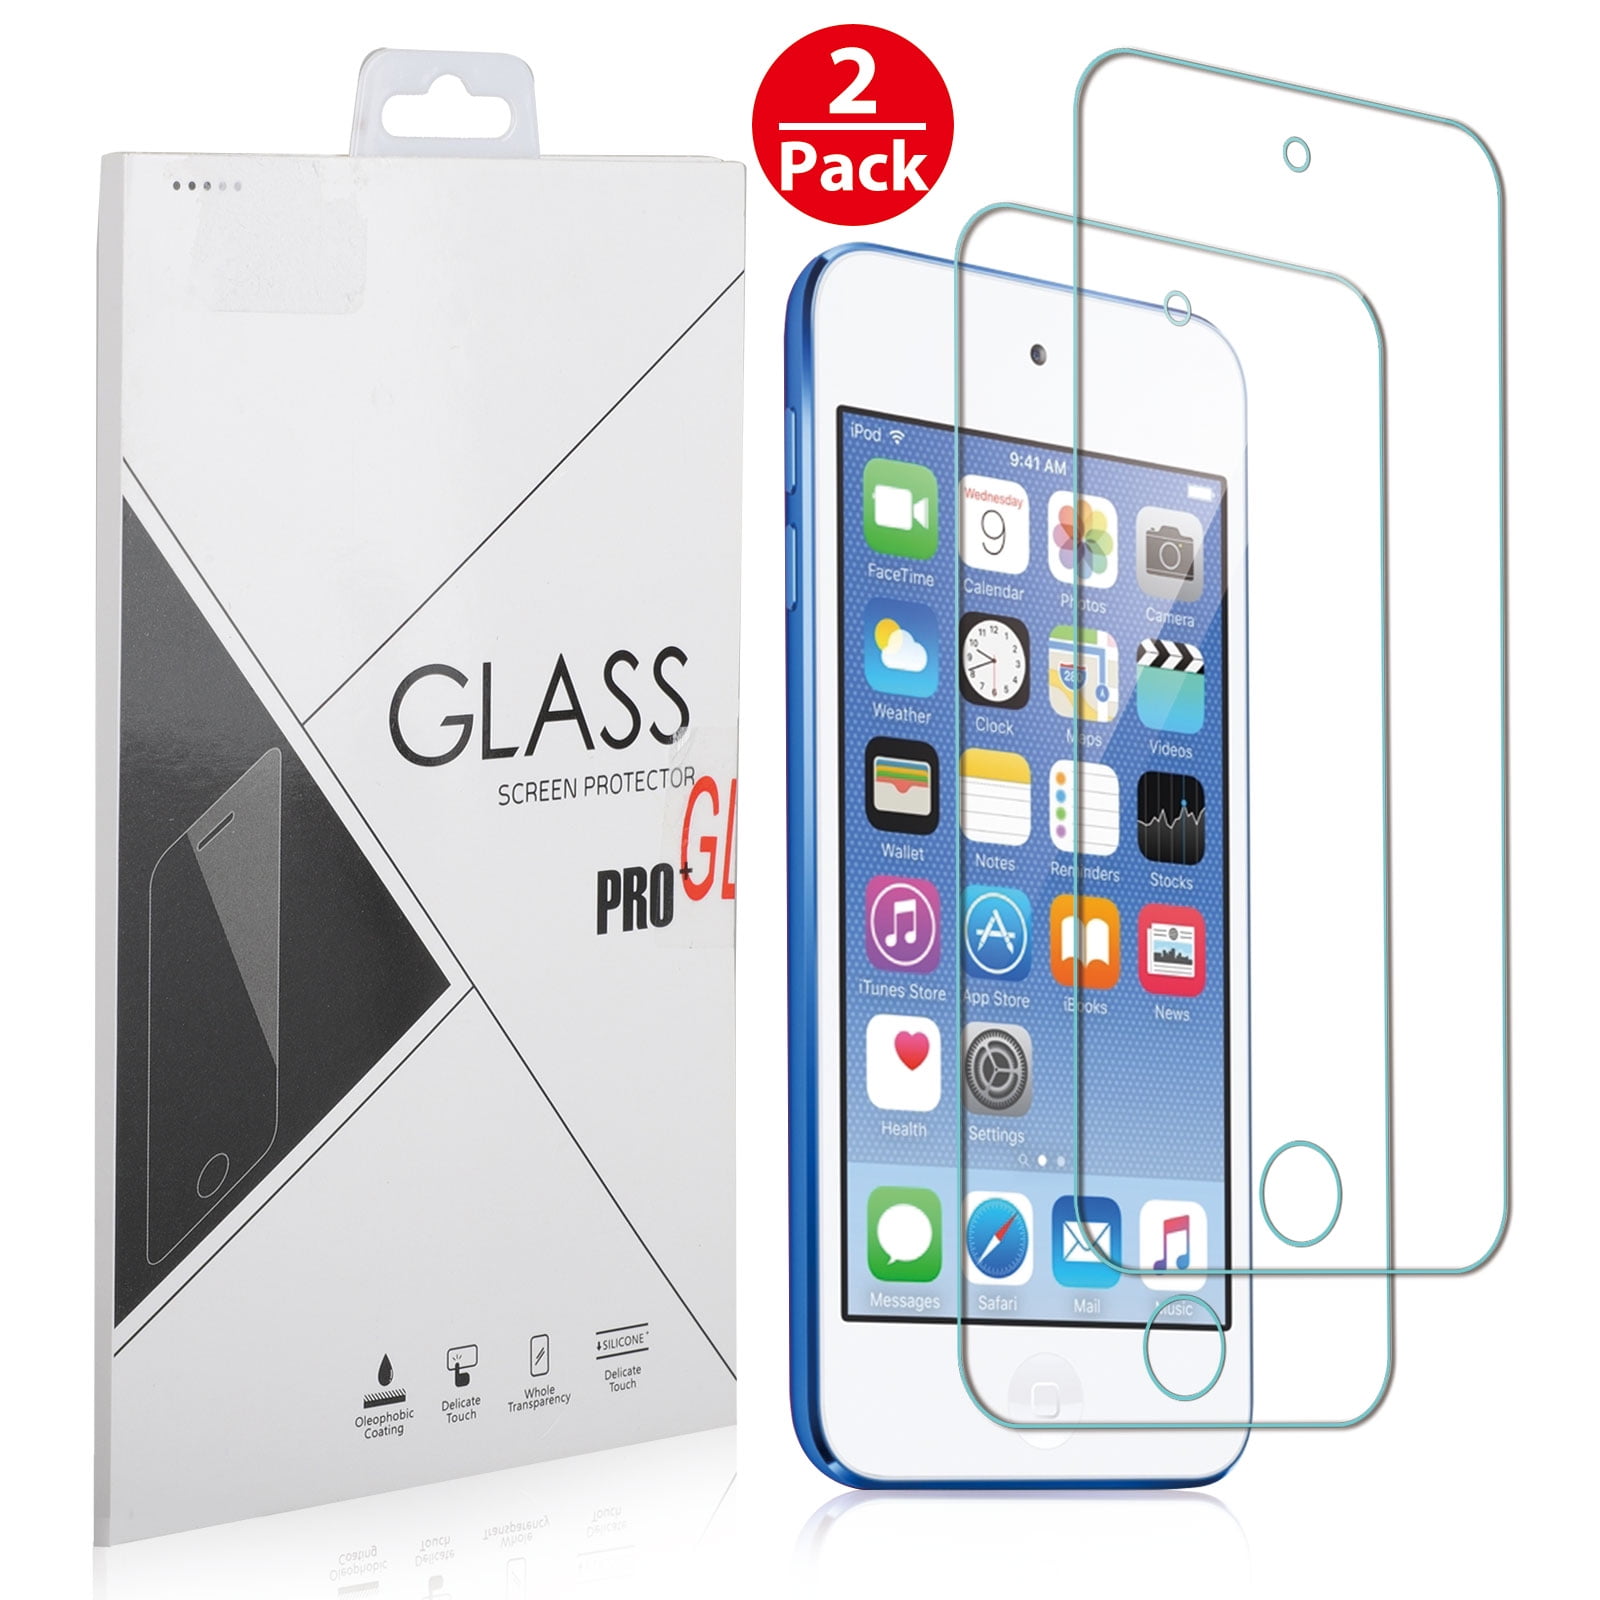 Premium HD Tempered Glass Screen Protector for iPad Mini Pro 9.7" iPod Touch 5 6 